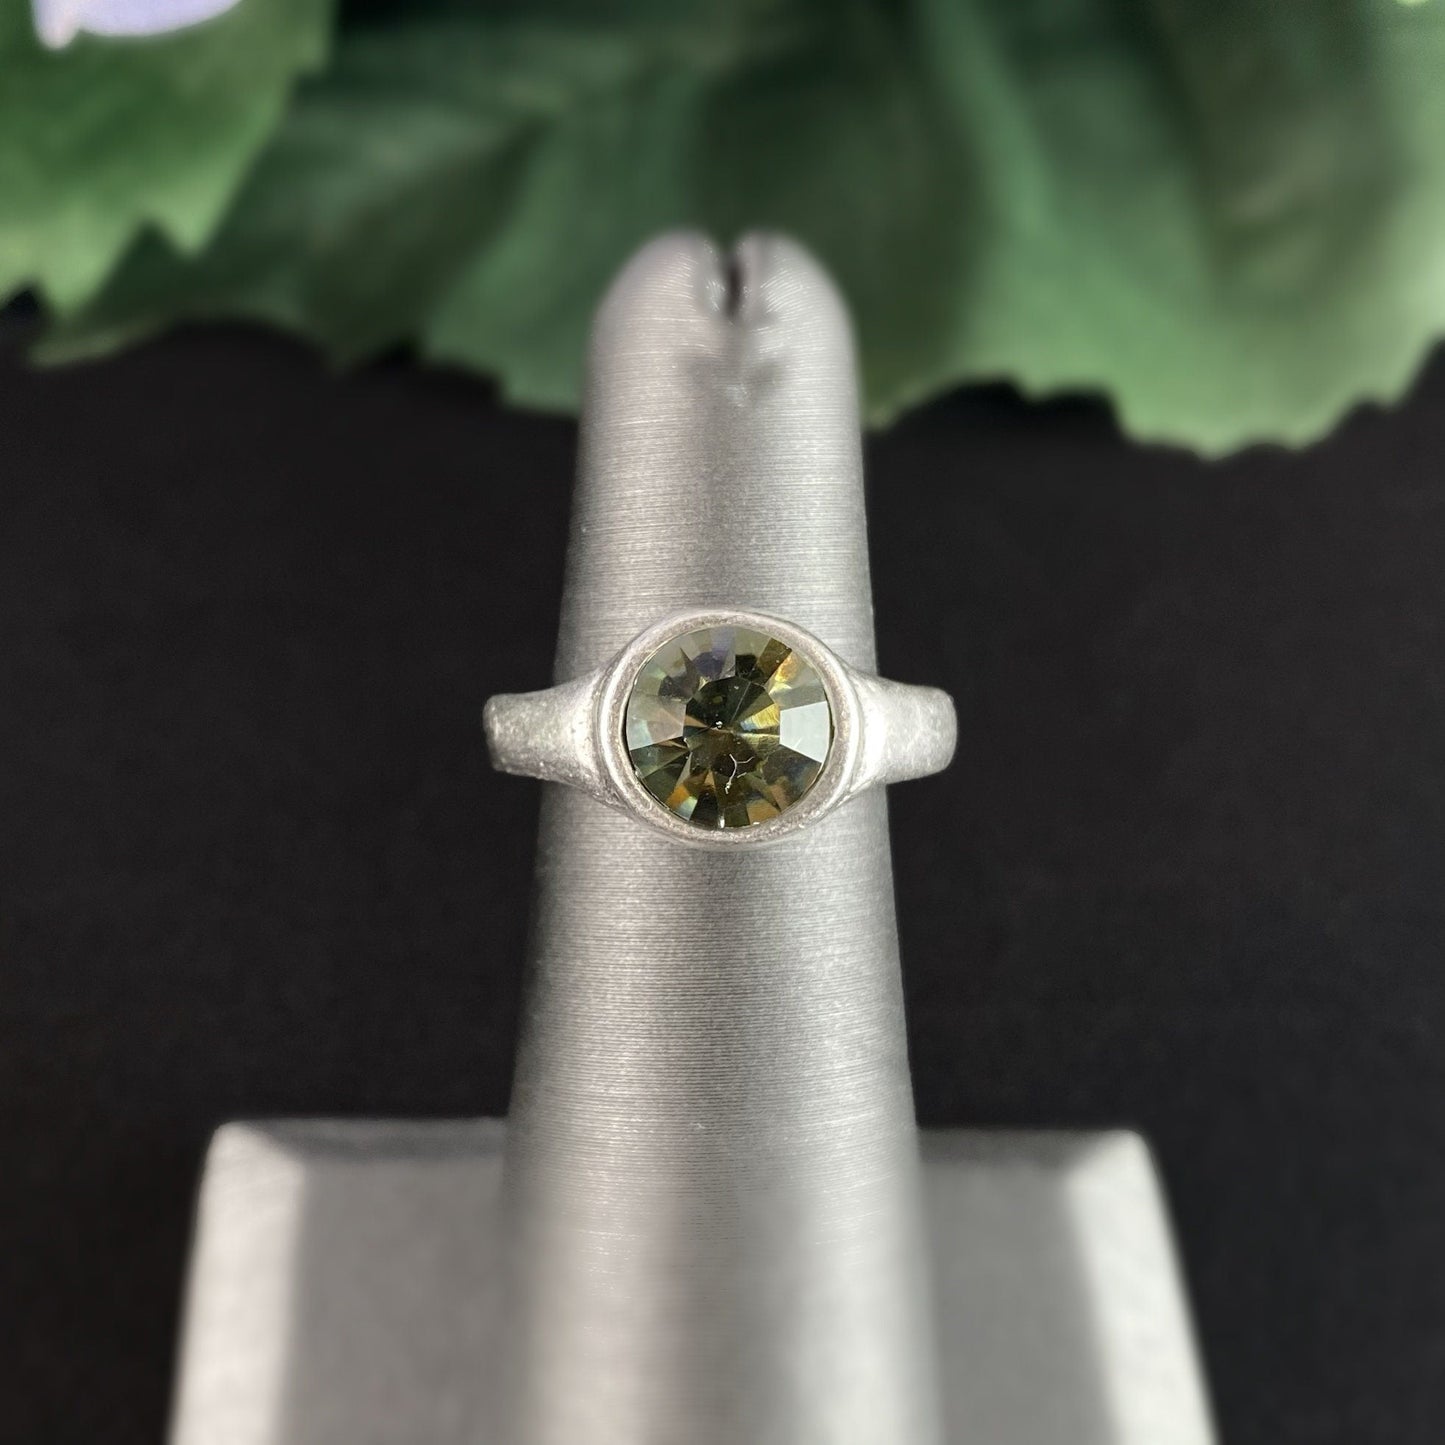 Silver Ring with Green Crystal, Handmade, Nickel Free